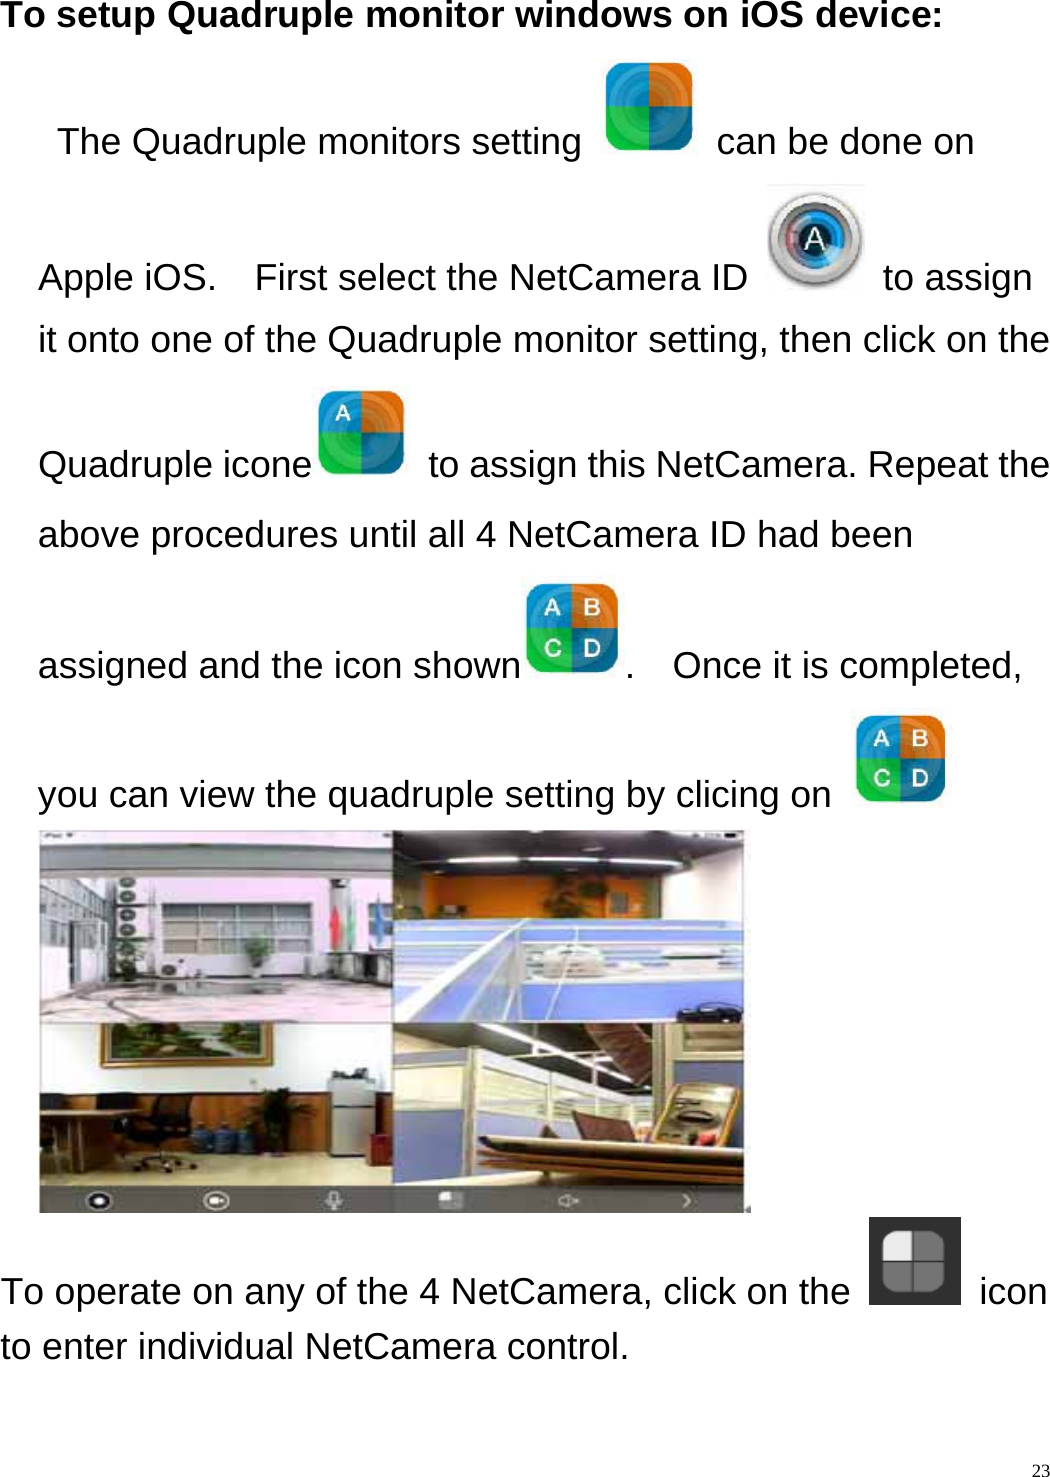    23To setup Quadruple monitor windows on iOS device:   The Quadruple monitors setting    can be done on Apple iOS.    First select the NetCamera ID   to assign it onto one of the Quadruple monitor setting, then click on the Quadruple icone   to assign this NetCamera. Repeat the above procedures until all 4 NetCamera ID had been assigned and the icon shown .  Once it is completed, you can view the quadruple setting by clicing on    To operate on any of the 4 NetCamera, click on the   icon to enter individual NetCamera control.  